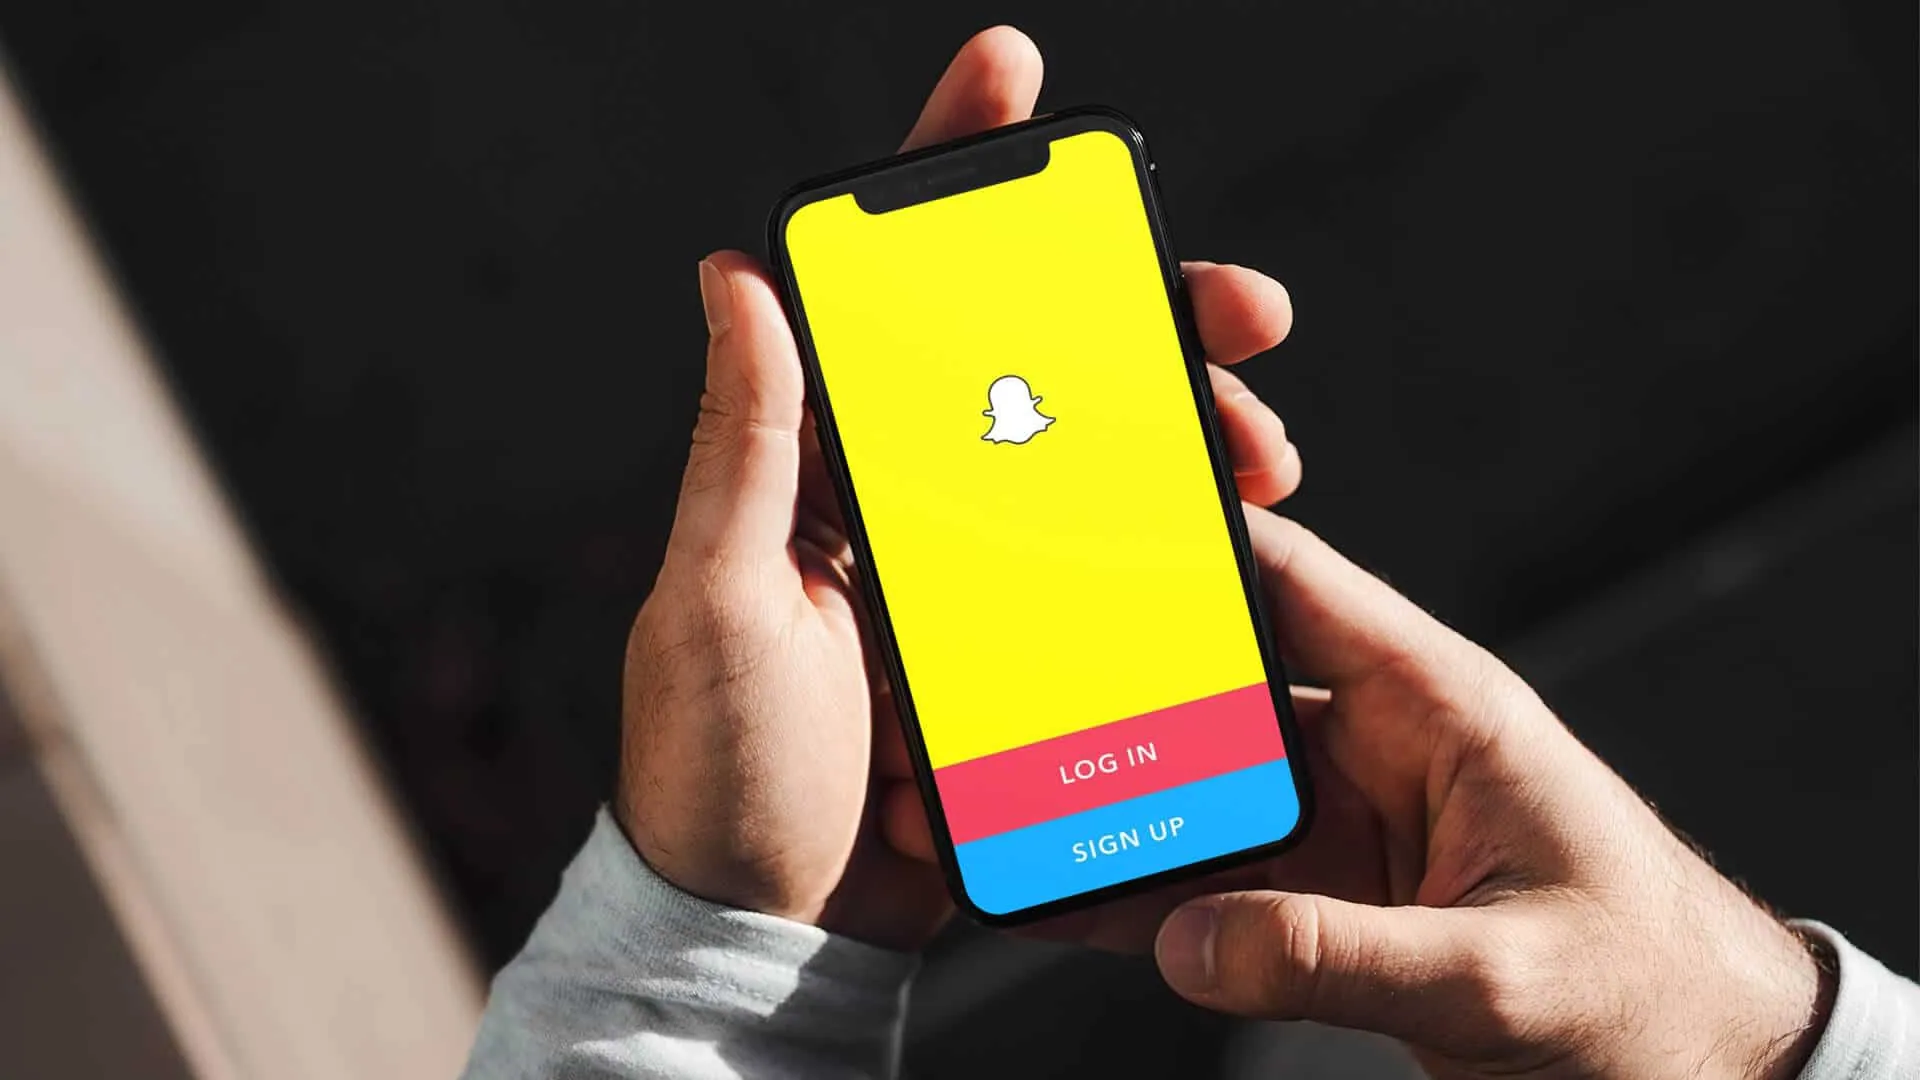 How To Add Snapchat By Phone Number